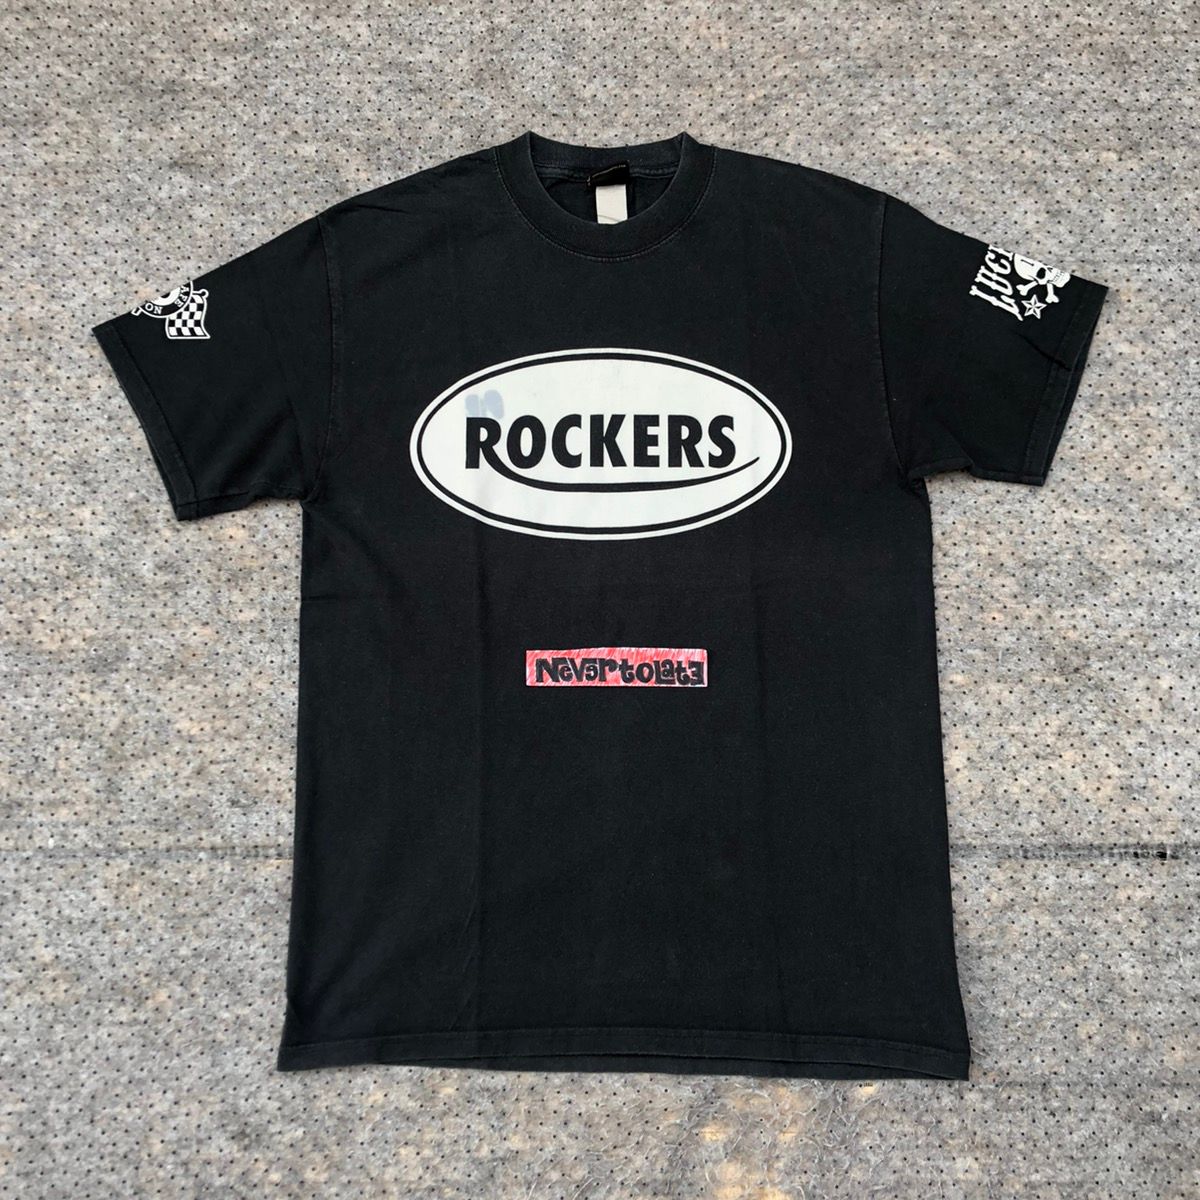 Vintage Lucky-13 Ace Cafe London T shirt | Grailed